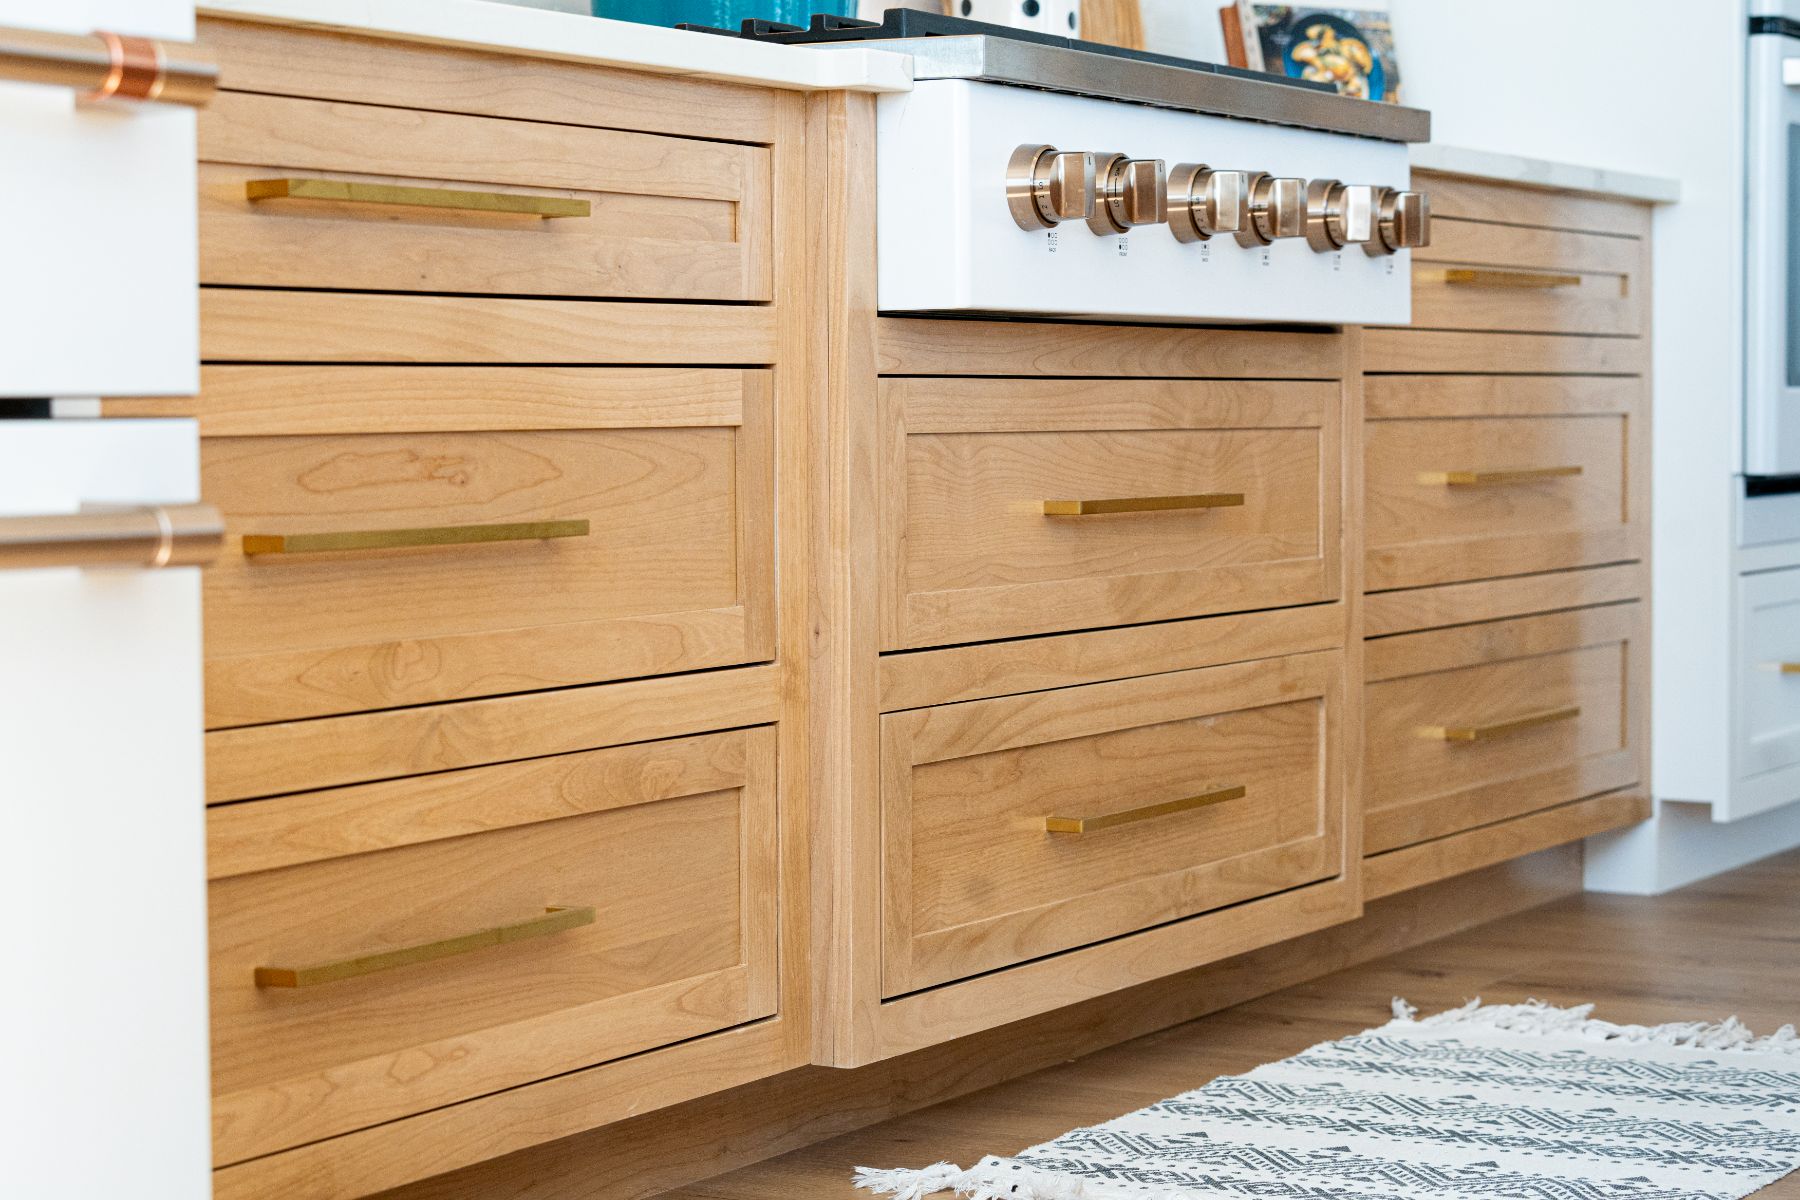 Kitchen cabinetry from Buhl